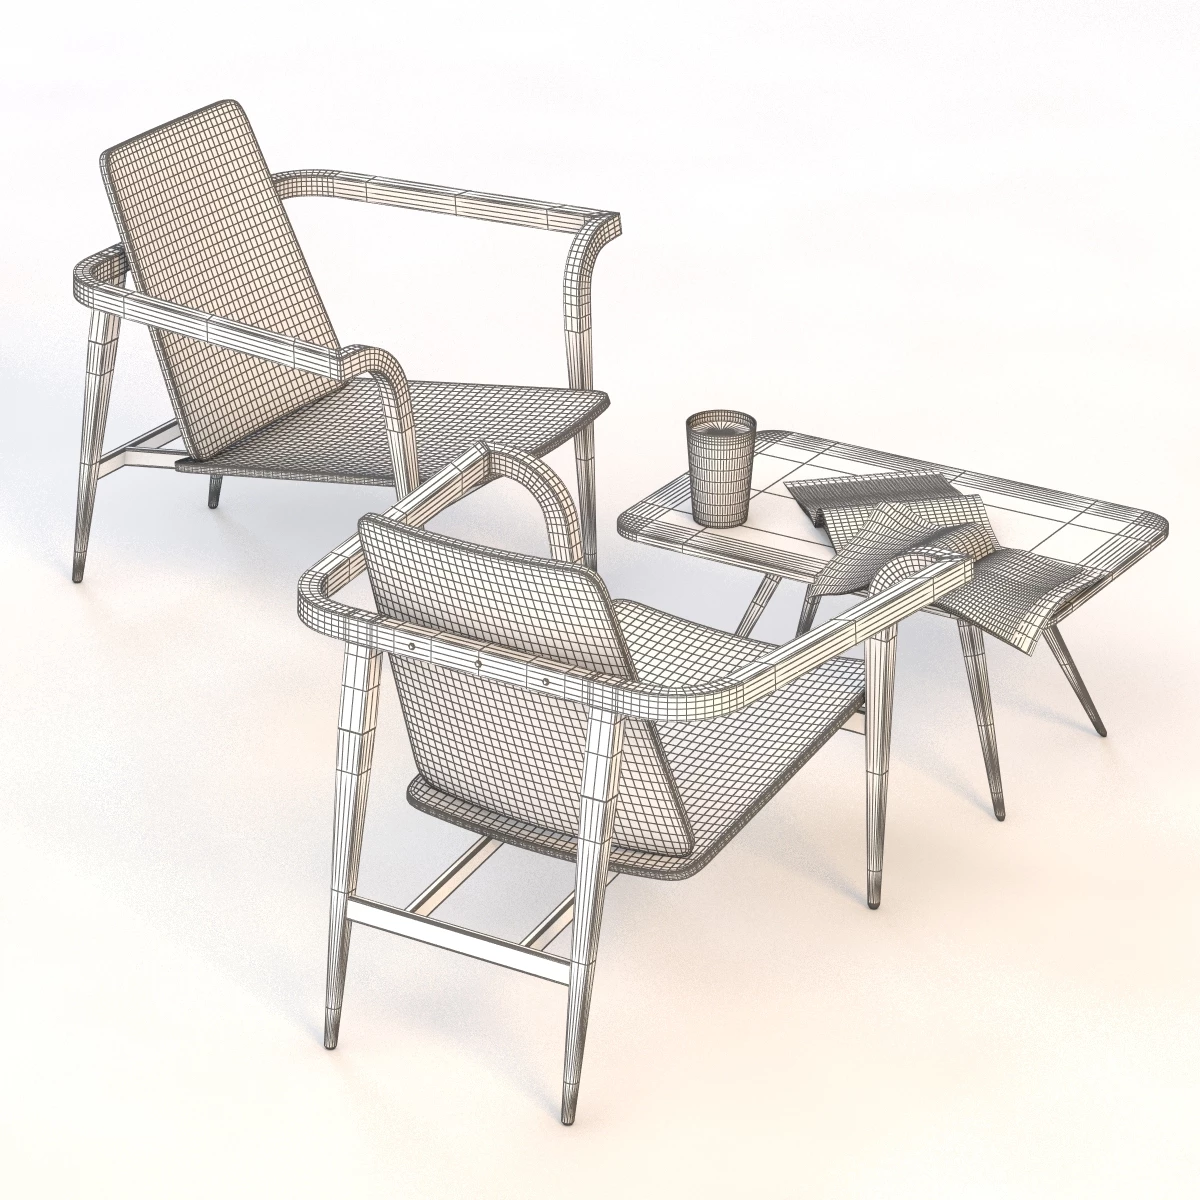 Modernatique Chair And Table 3D Model_07